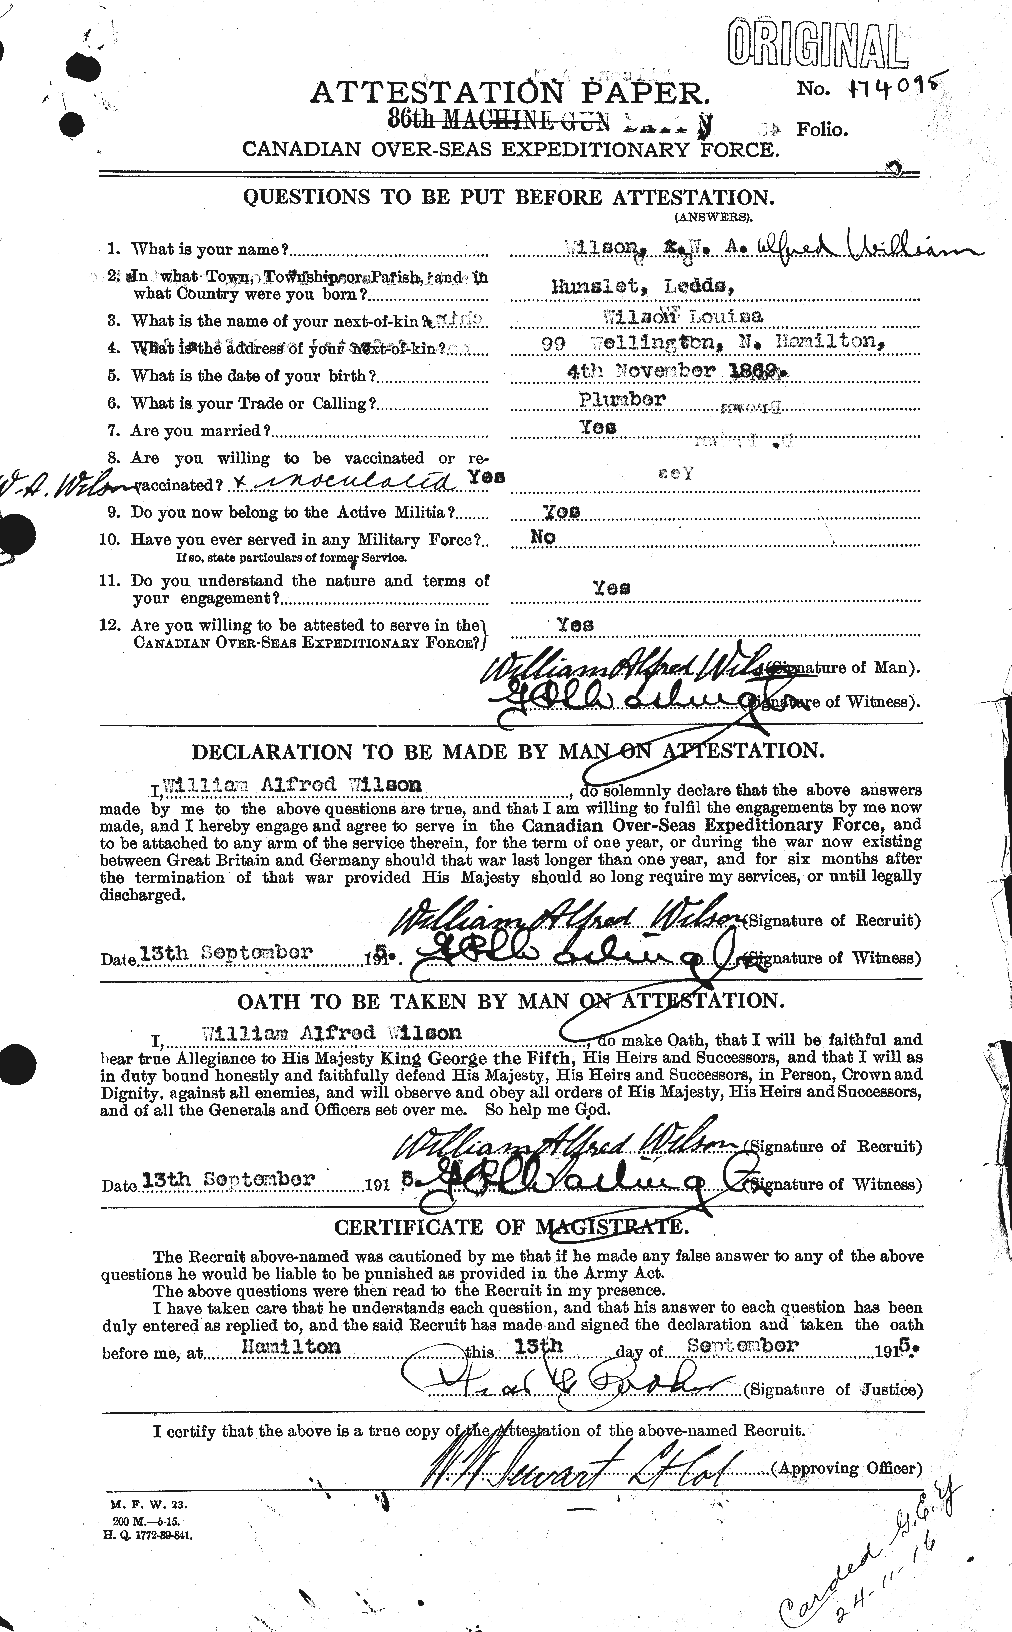 Personnel Records of the First World War - CEF 681928a